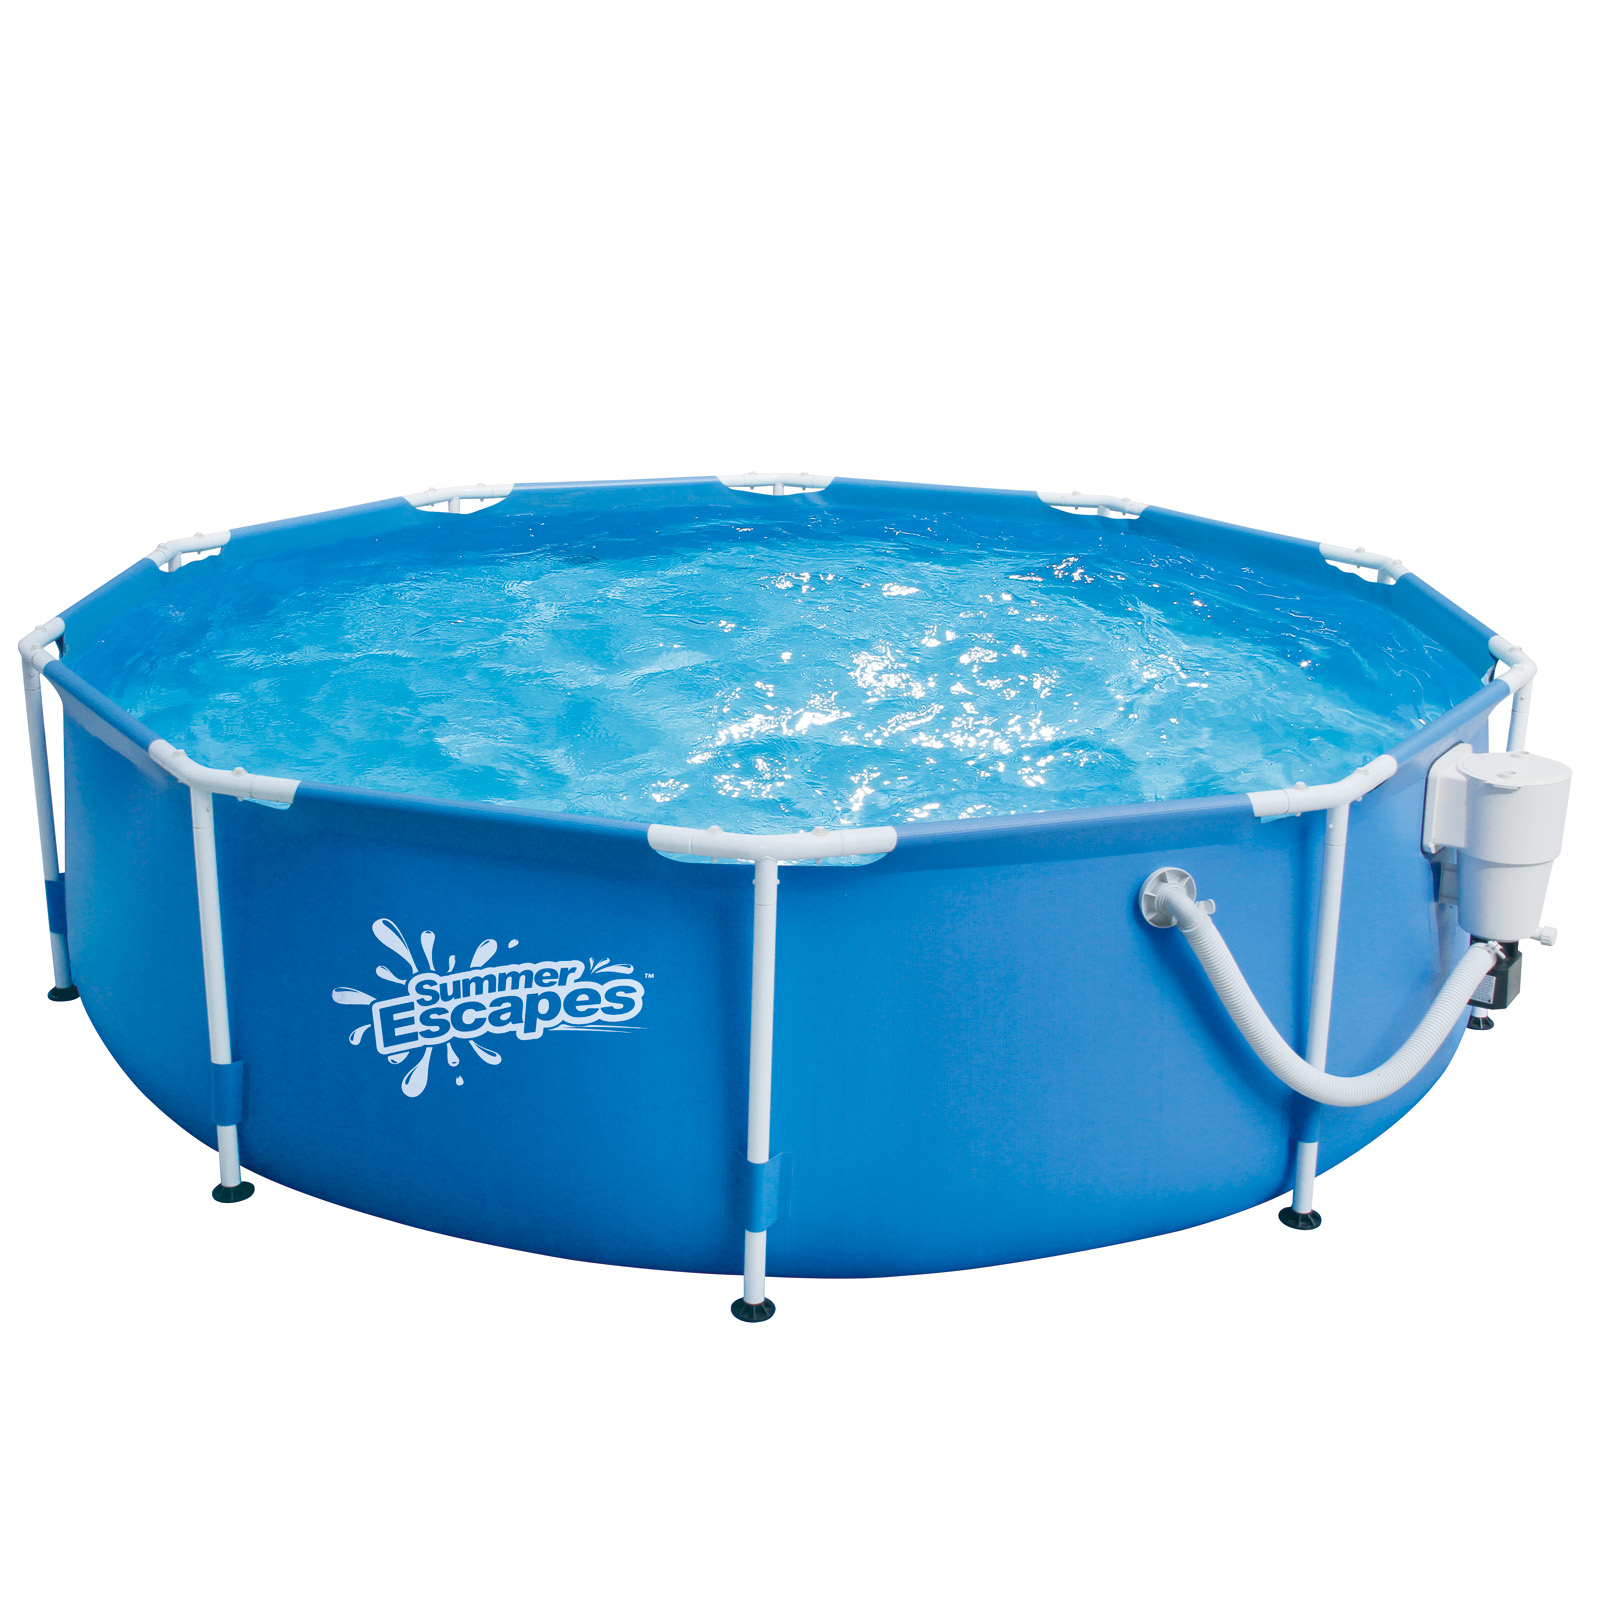 Summer Escapes Pool Set Metal Frame 10 ft x 30 in | Shop Your Way